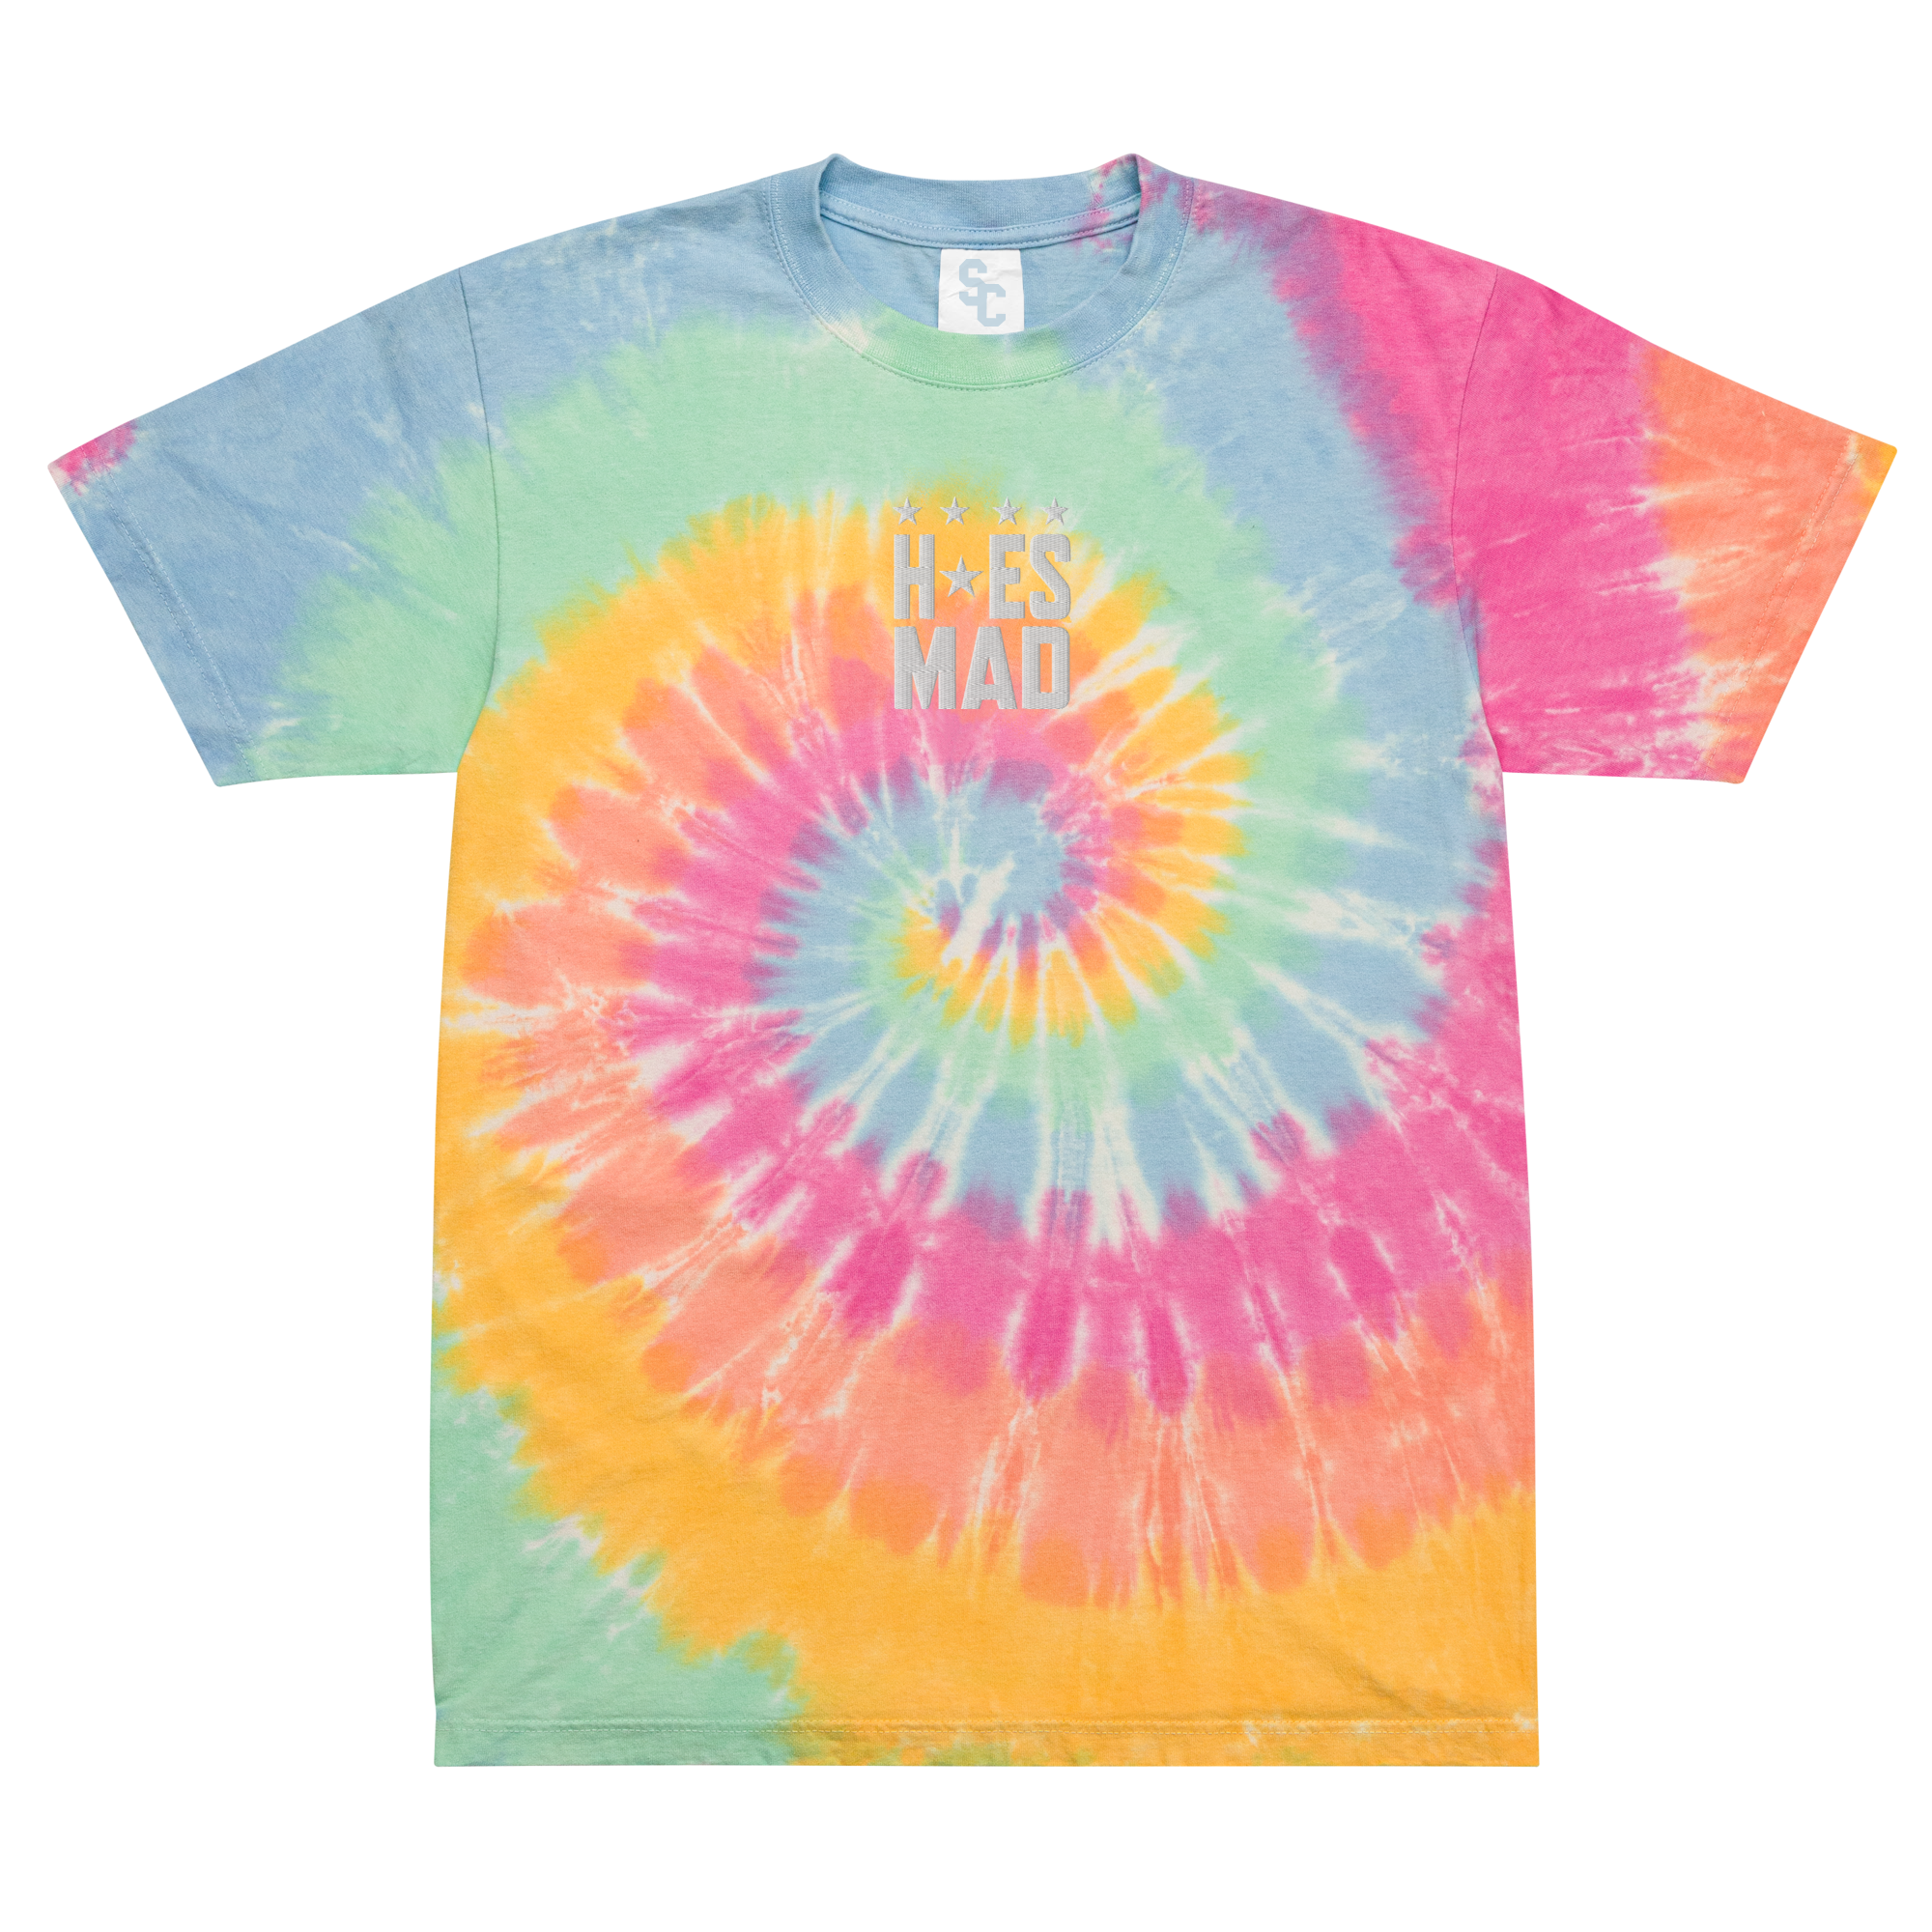 H*es Mad x State Champs - Pride Tie Dye